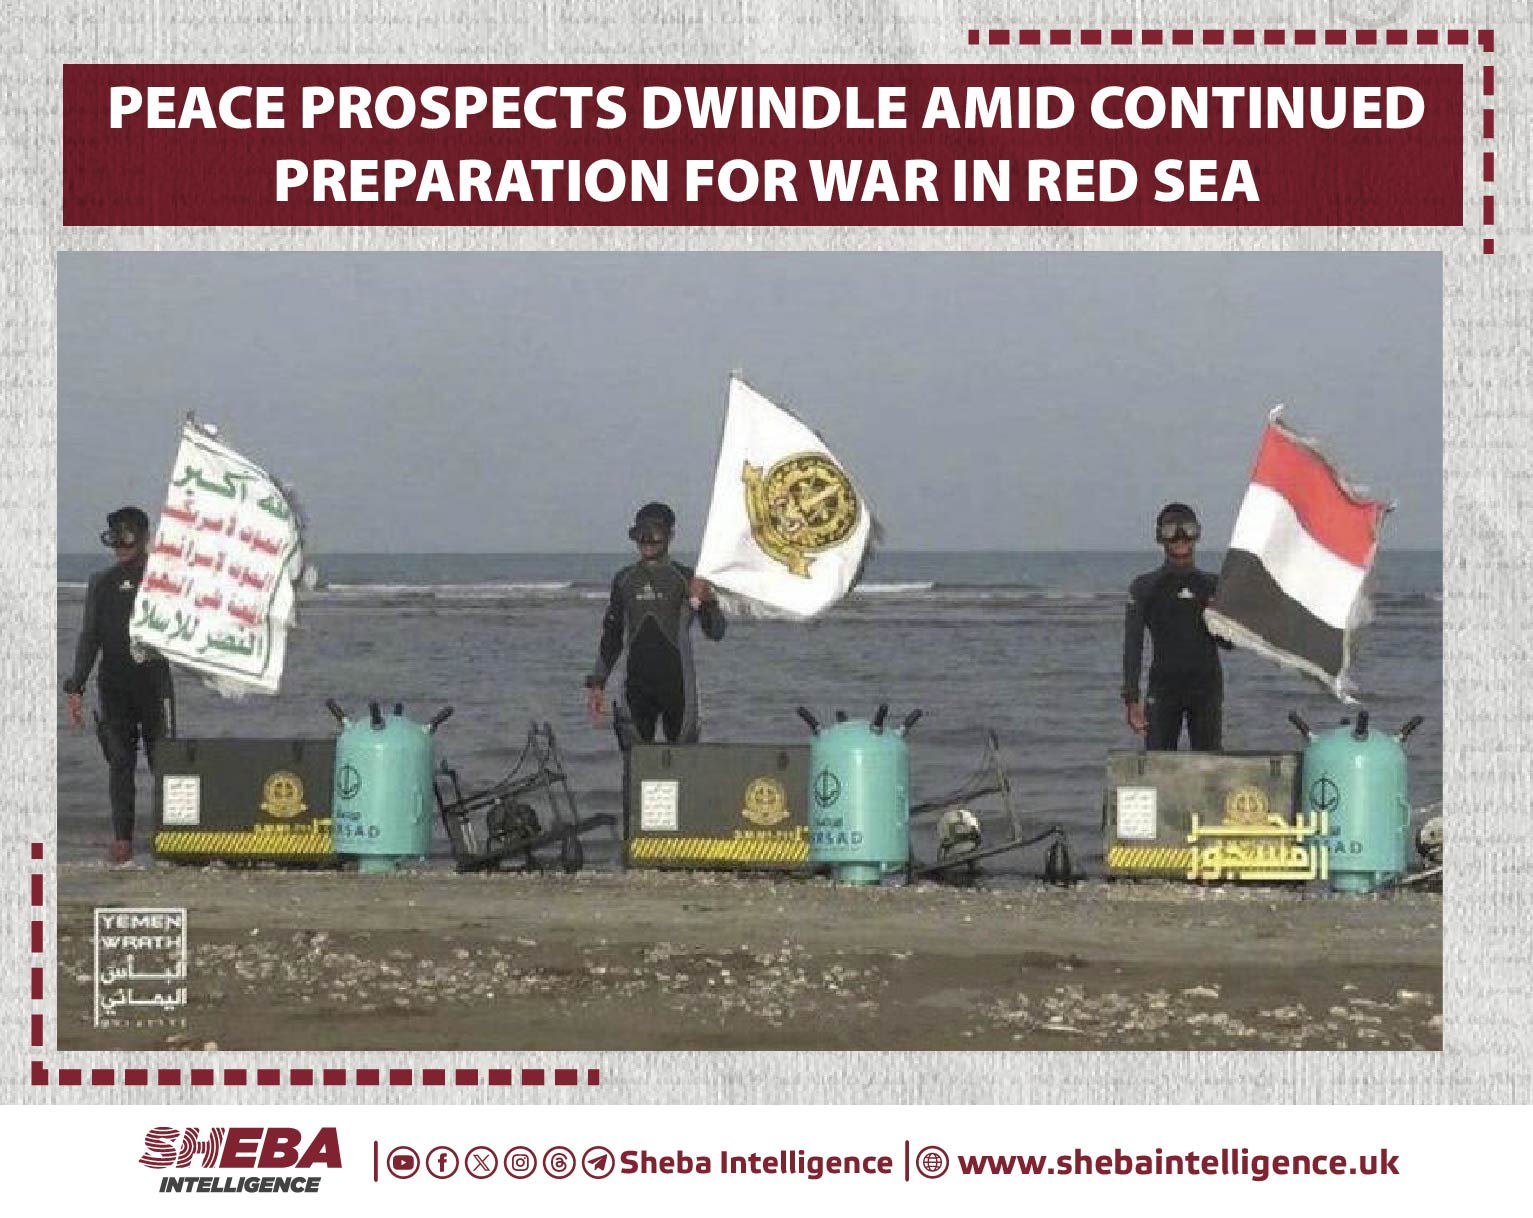 Peace Prospects Dwindle Amid Continued Preparation for War in Red Sea